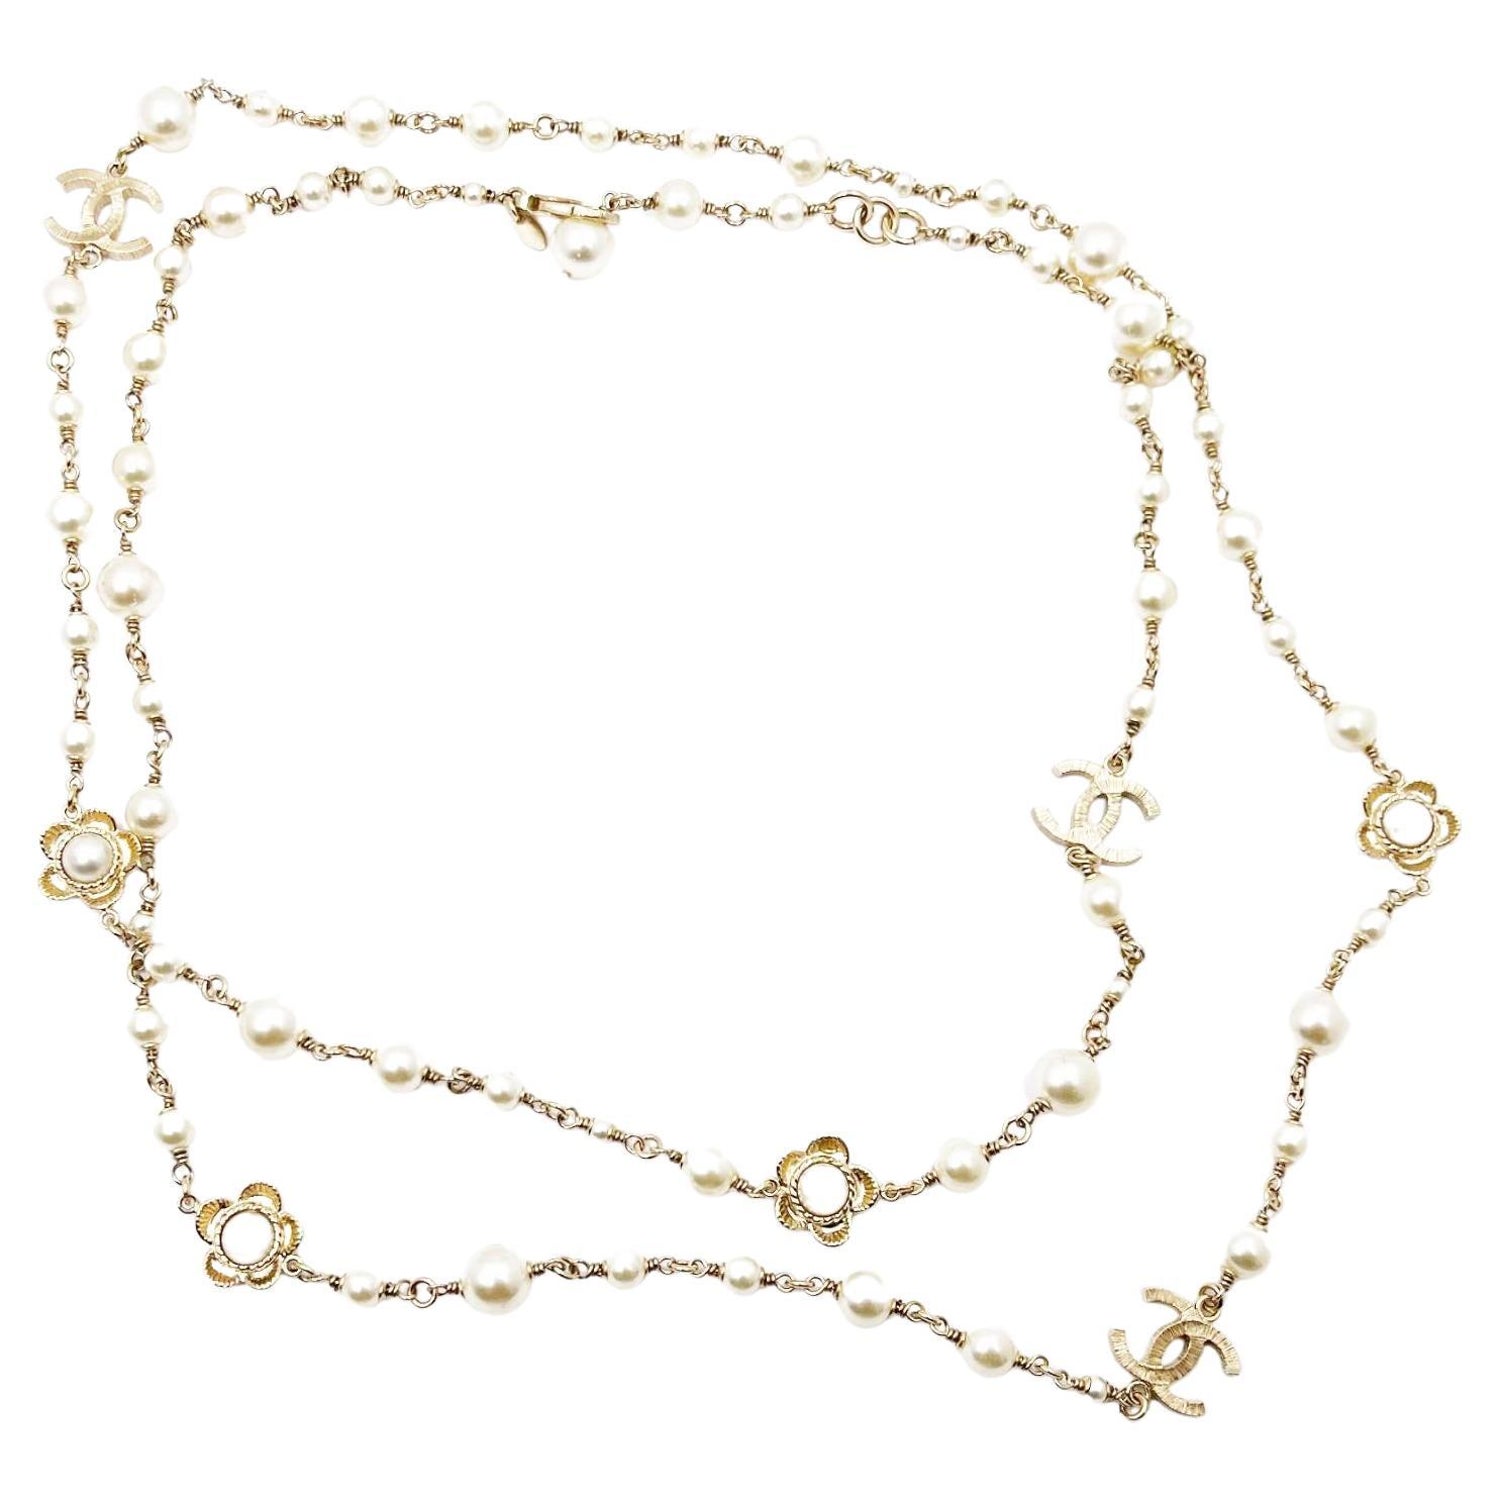 Chanel Classic 3 Gold CC Crystal Long Pearl Necklace at 1stDibs